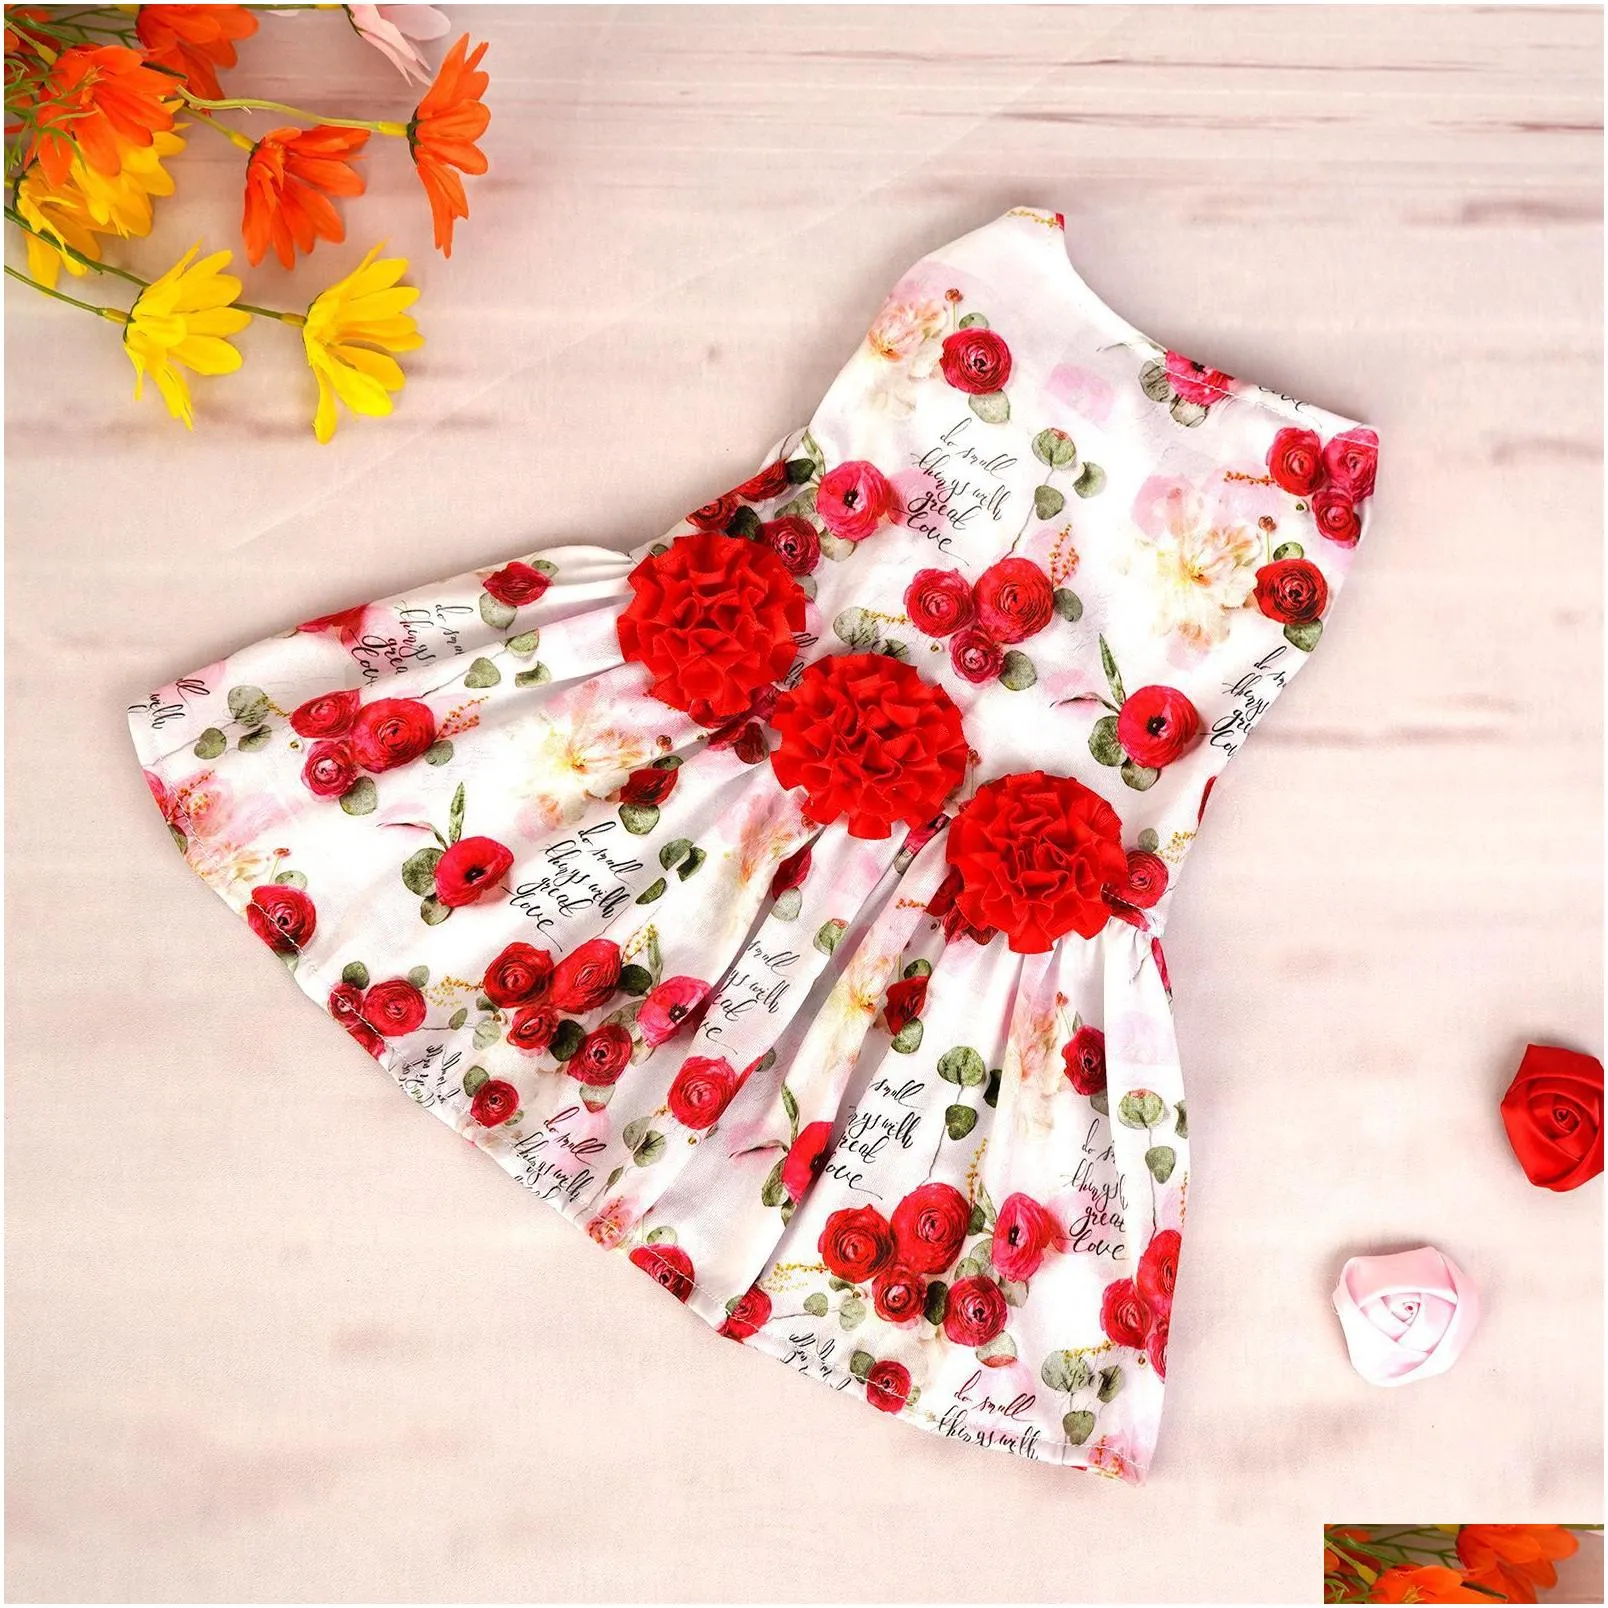 Dog Apparel Valentines Day Clothes Love Your Outfit Summer Princess Skirt Red Tle Dress With Bowknot For Small Dogs Cat Girl Rose S Dr Dhmxk